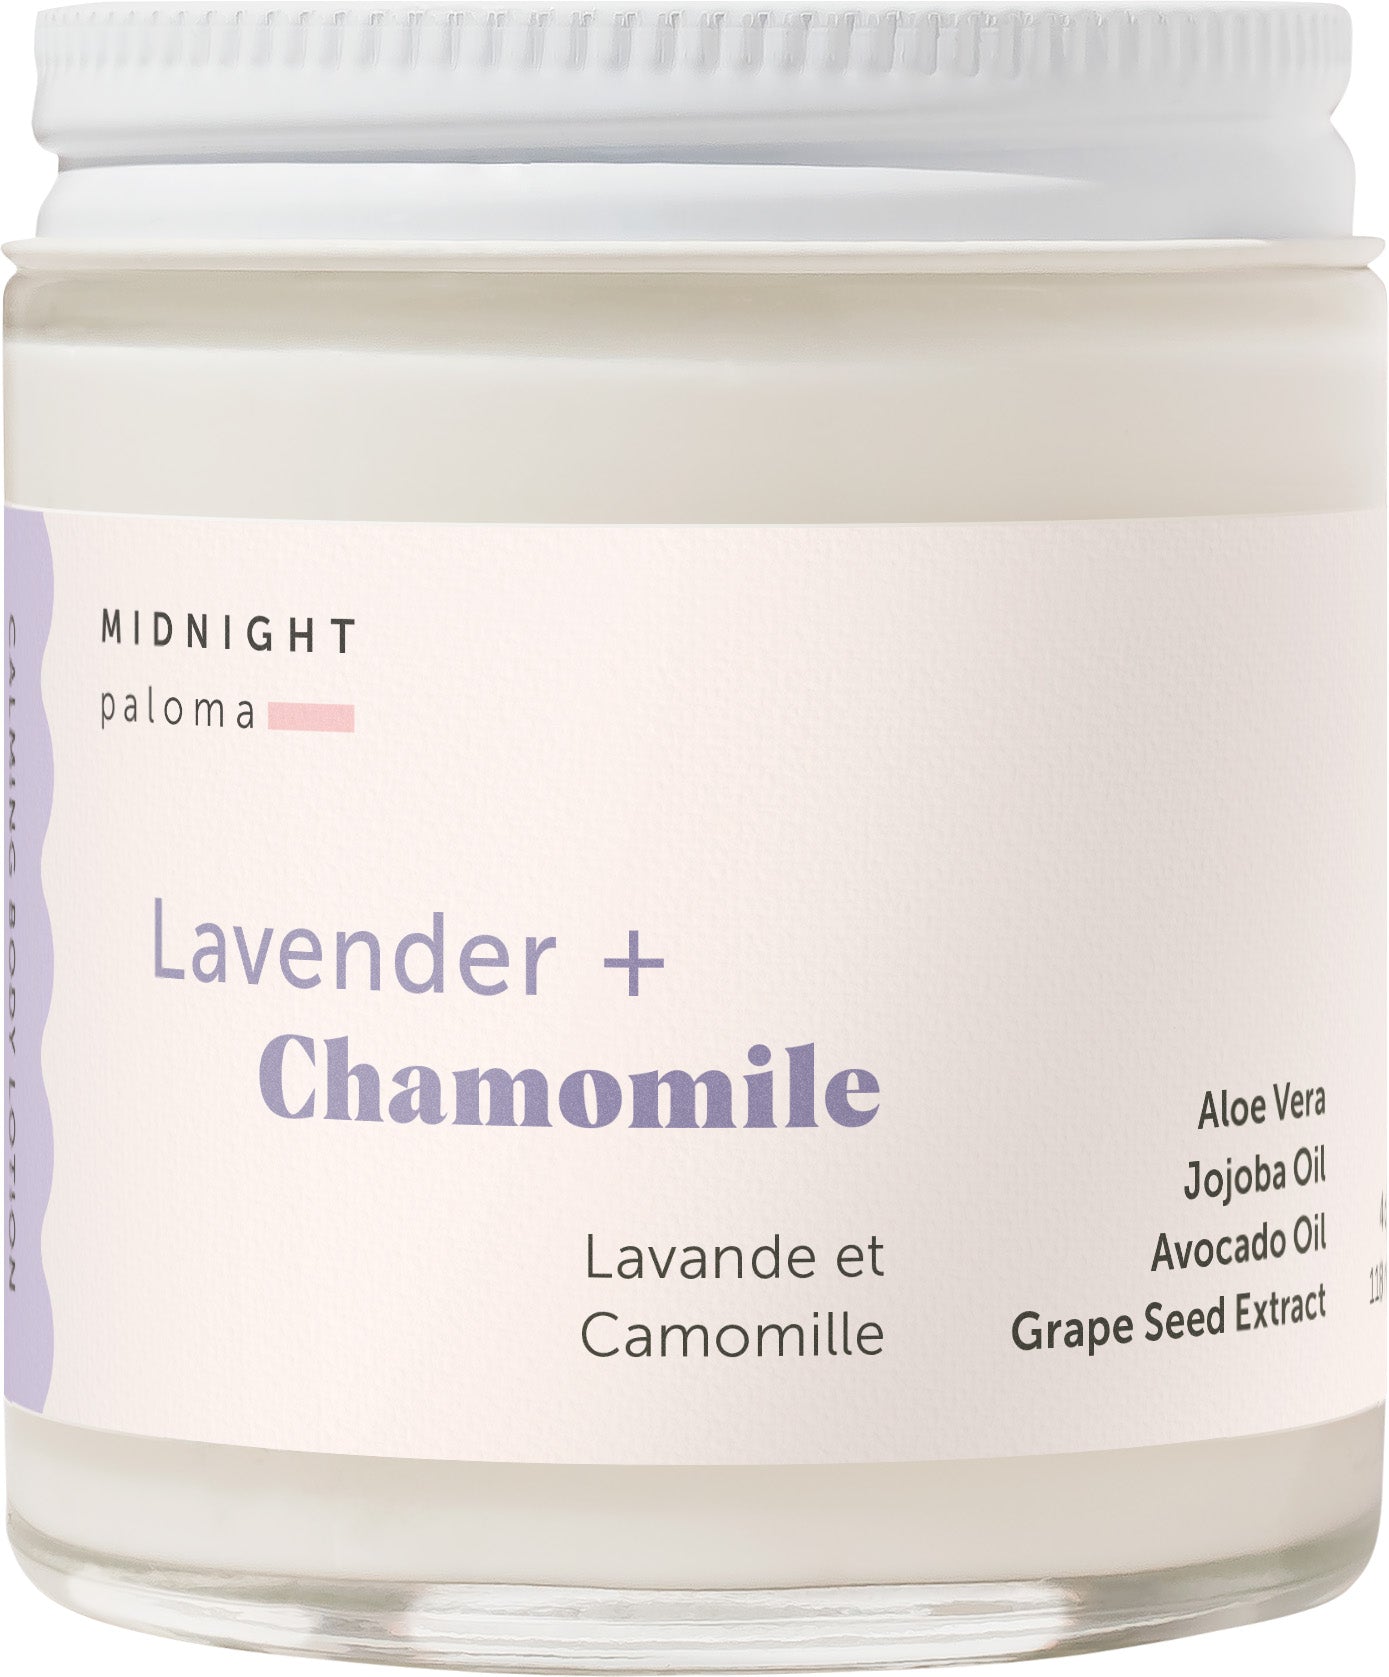 WS NEW! Lavender + Chamomile Body Lotion